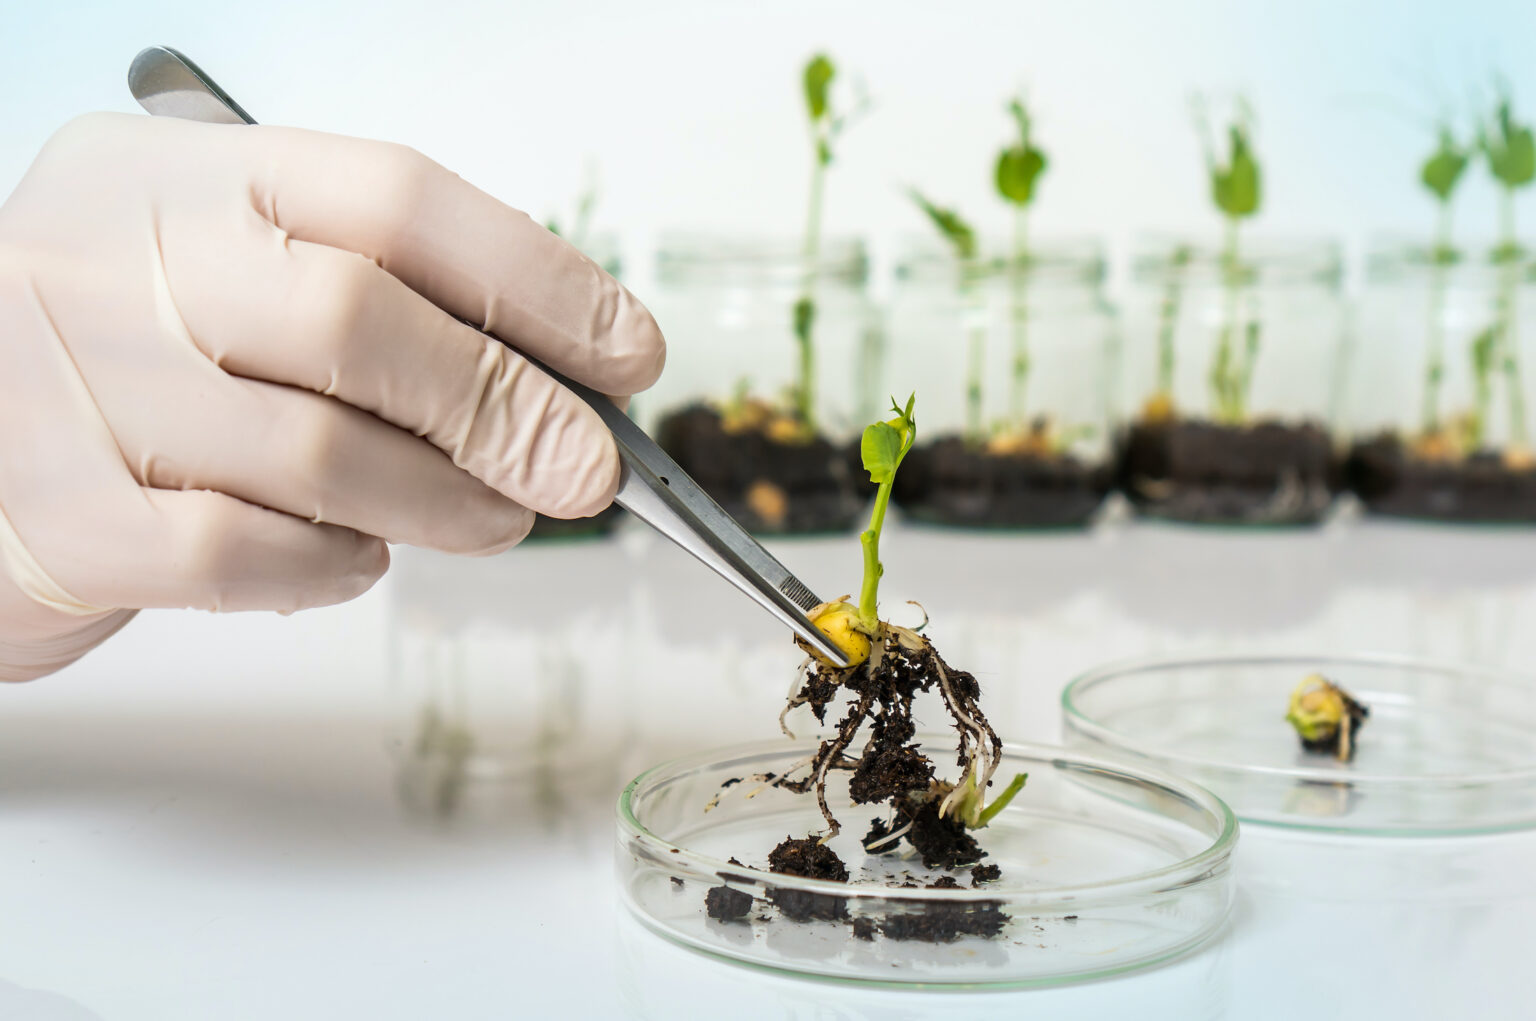 The power of gene editing can be wielded to modify plants and, among other things, achieve significant sustainability wins. www.theexchange.africa